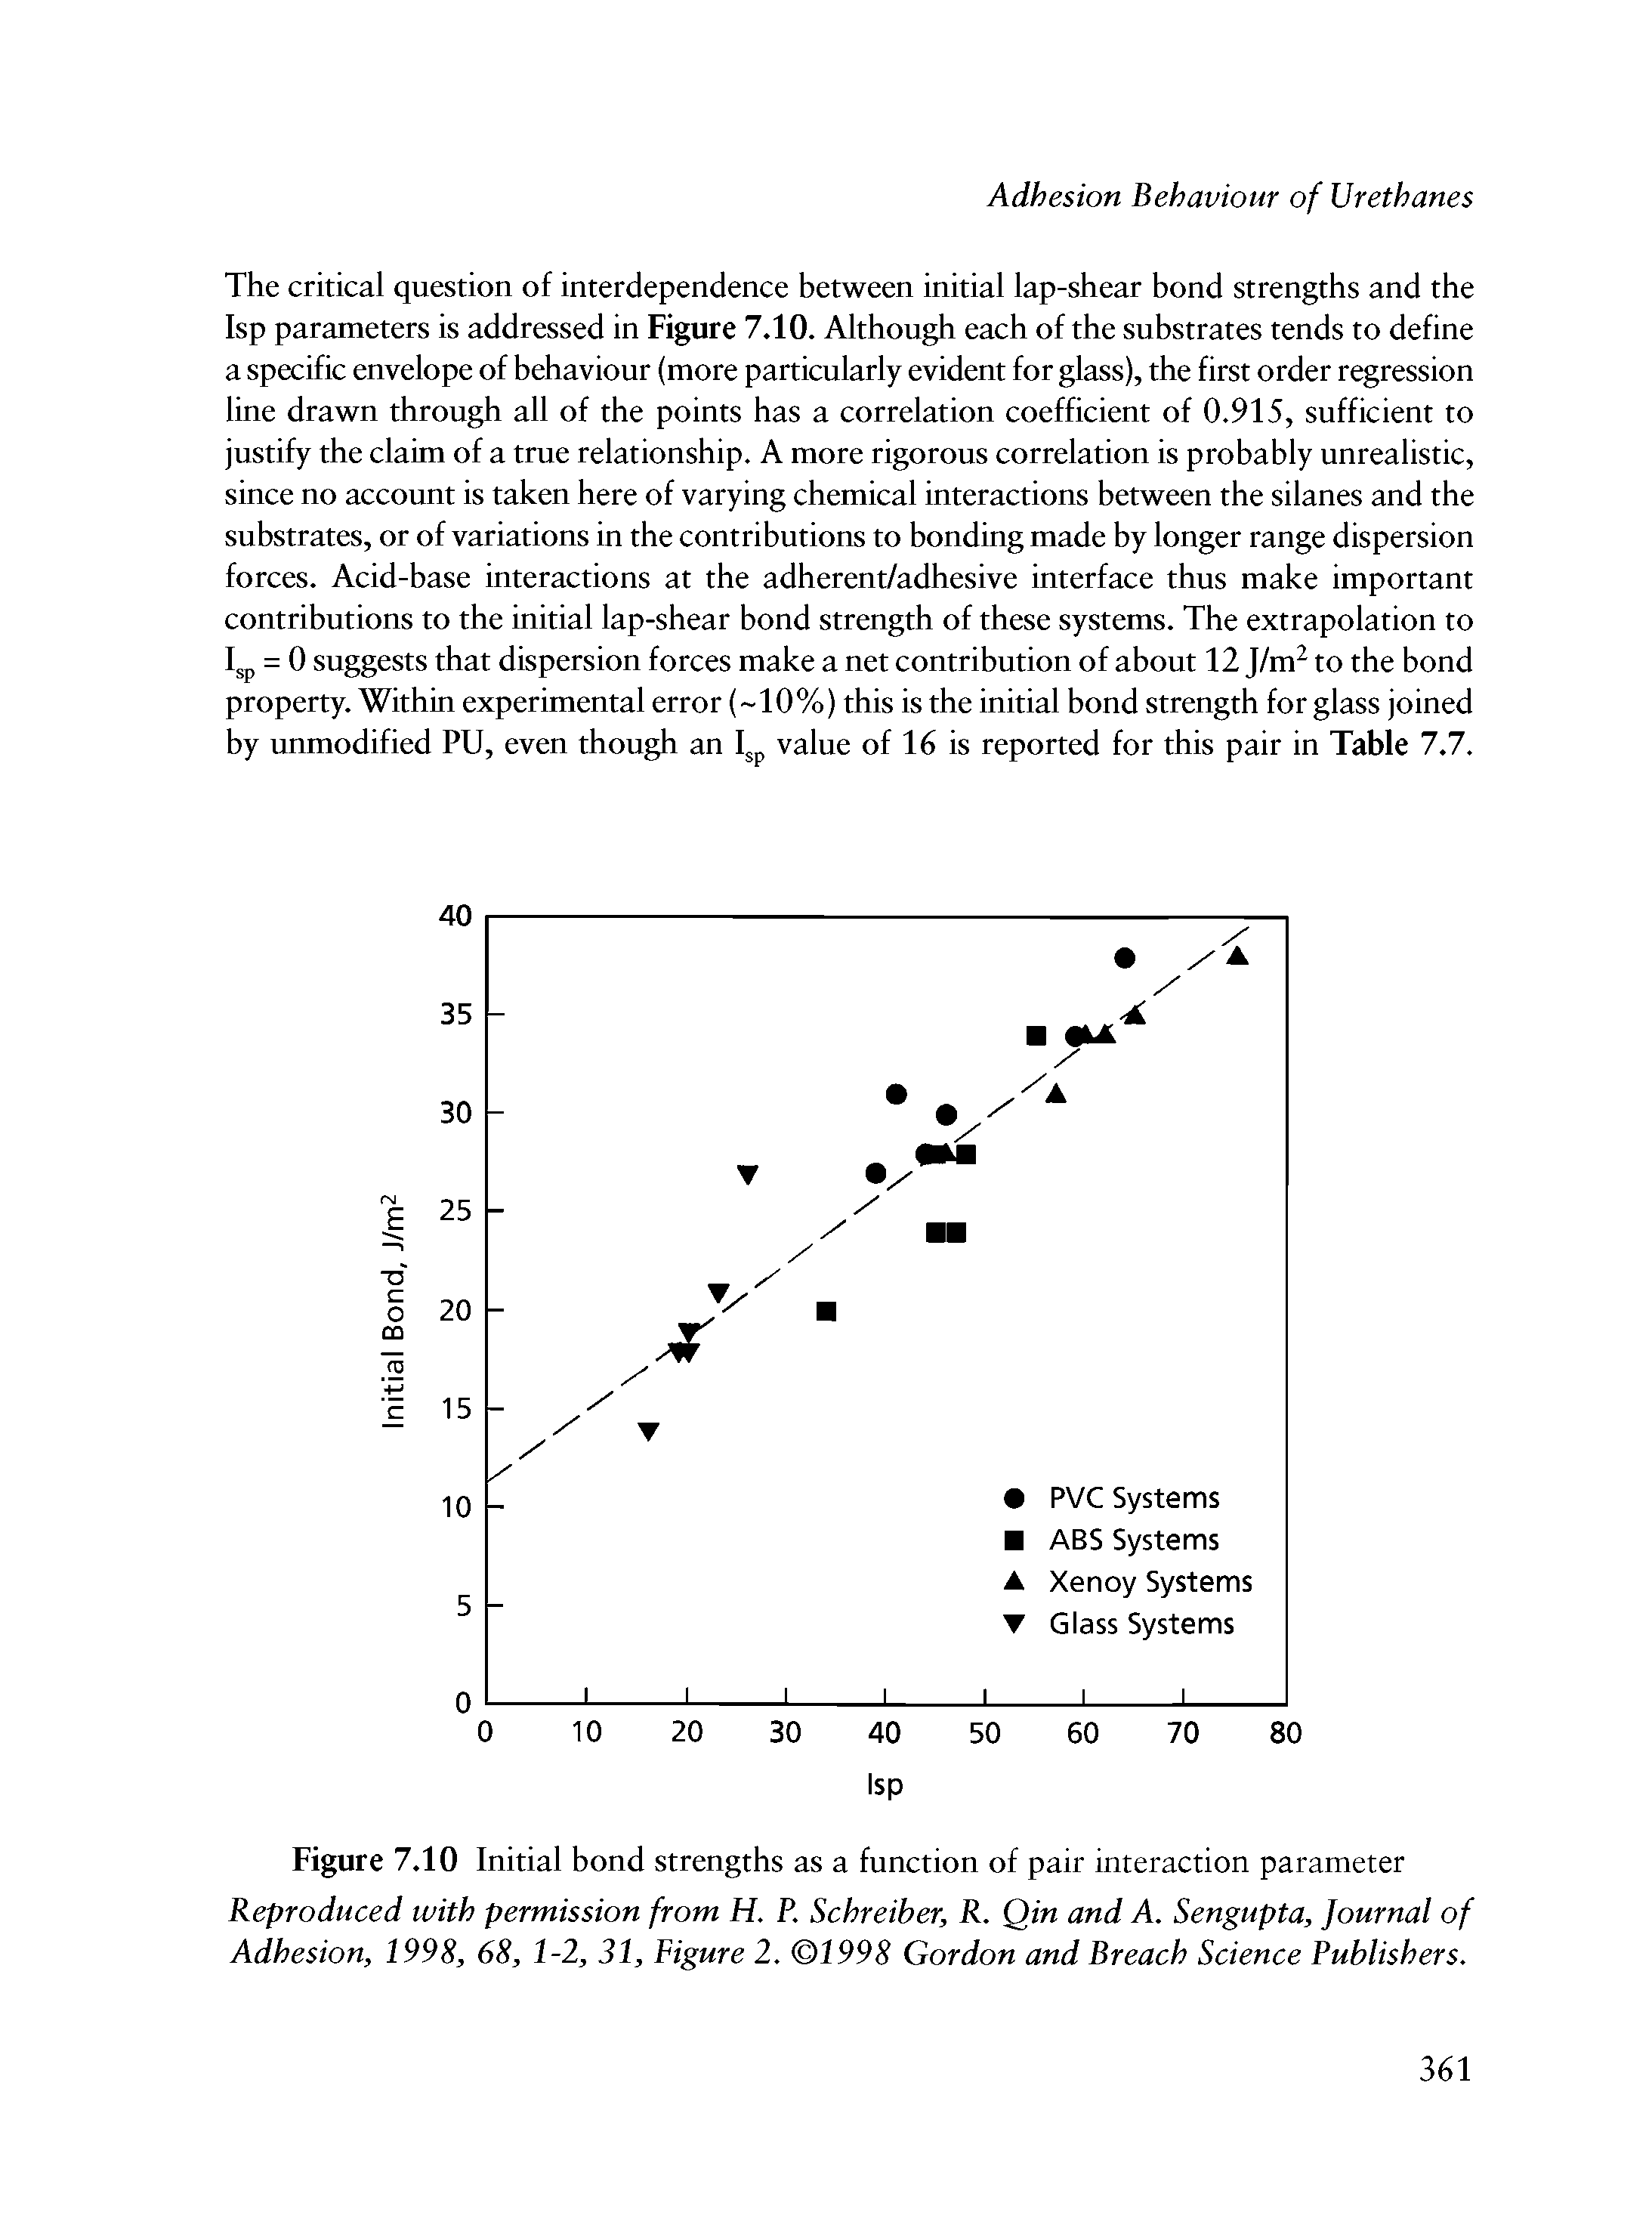 Figure 7.10 Initial bond strengths as a function of pair interaction parameter Reproduced with permission from H. P. Schreiber, R. Qin and A. Sengupta, Journal of Adhesion, 1998, 68, 1-2, 31, Figure 2. 1998 Gordon and Breach Science Publishers.